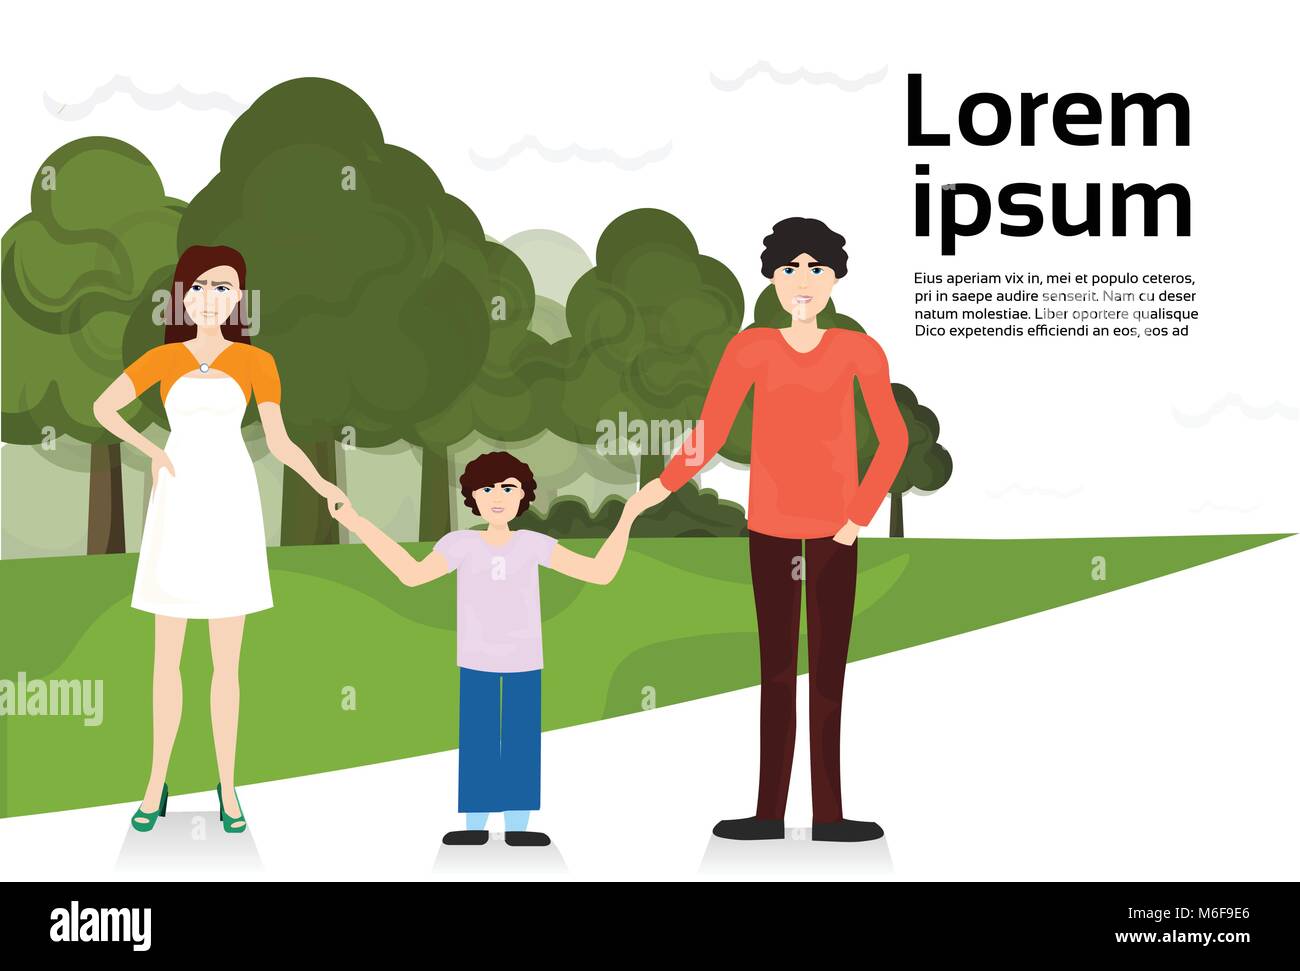 Parents With Son Walking In Urban Park Family Over Green Lawn And Trees On Template Background Stock Vector